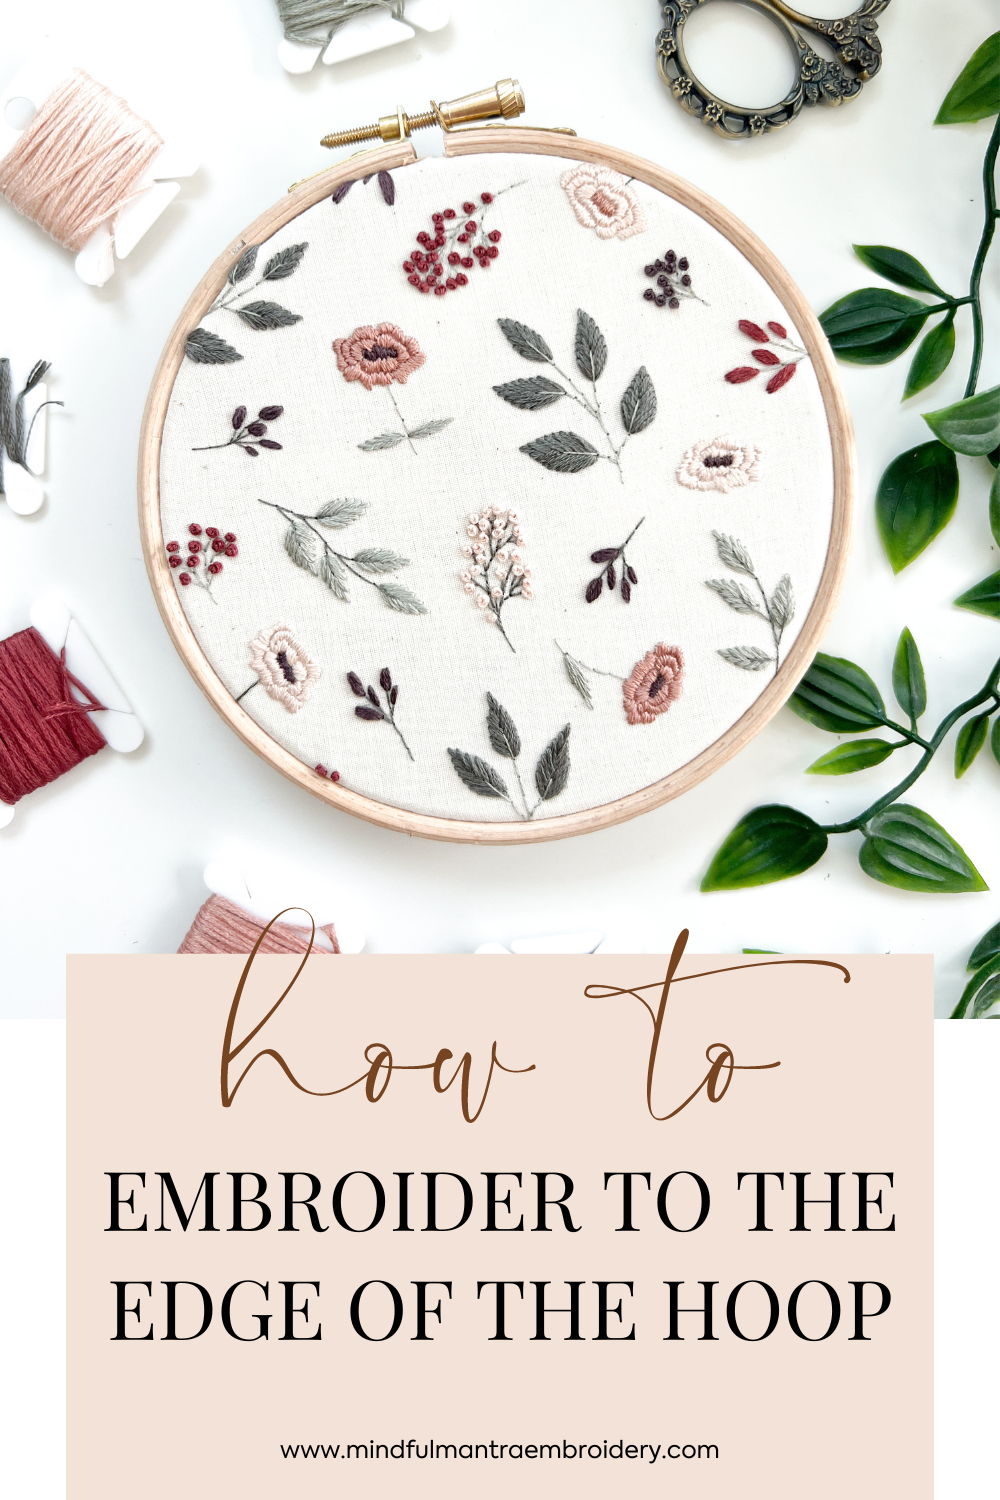 How to Embroider Up To The Edge of the Embroidery Hoop